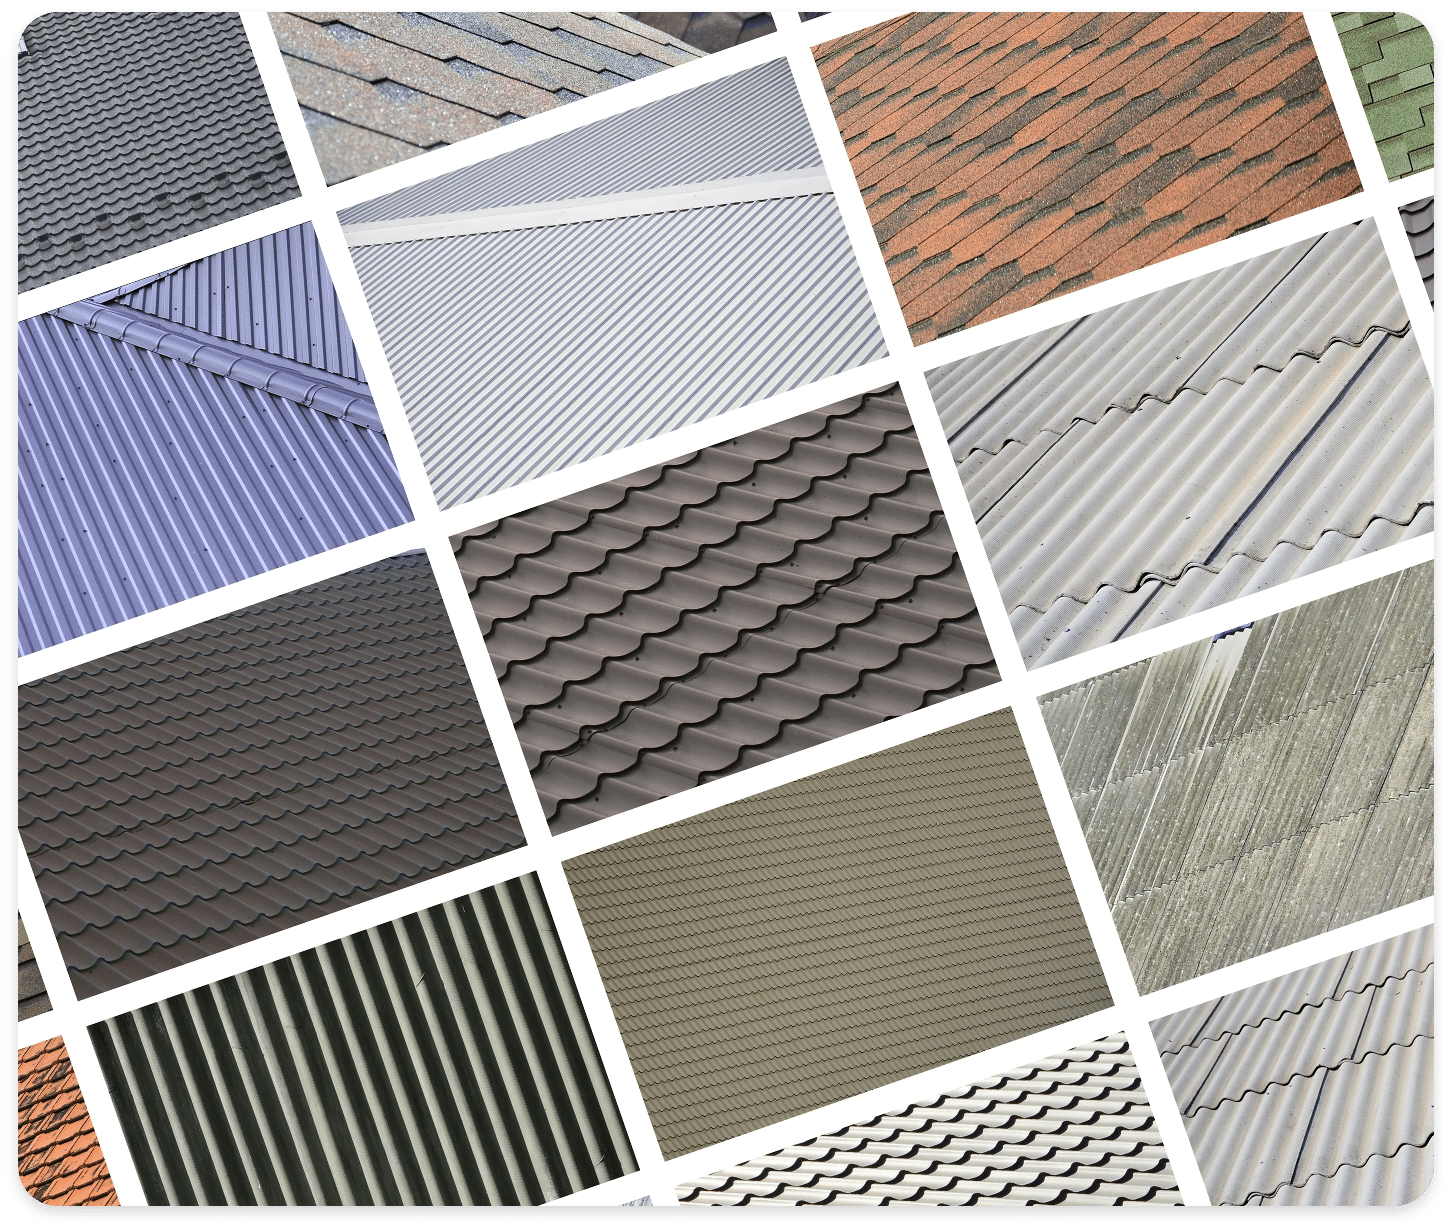 Different Types of Roofing in a Grid